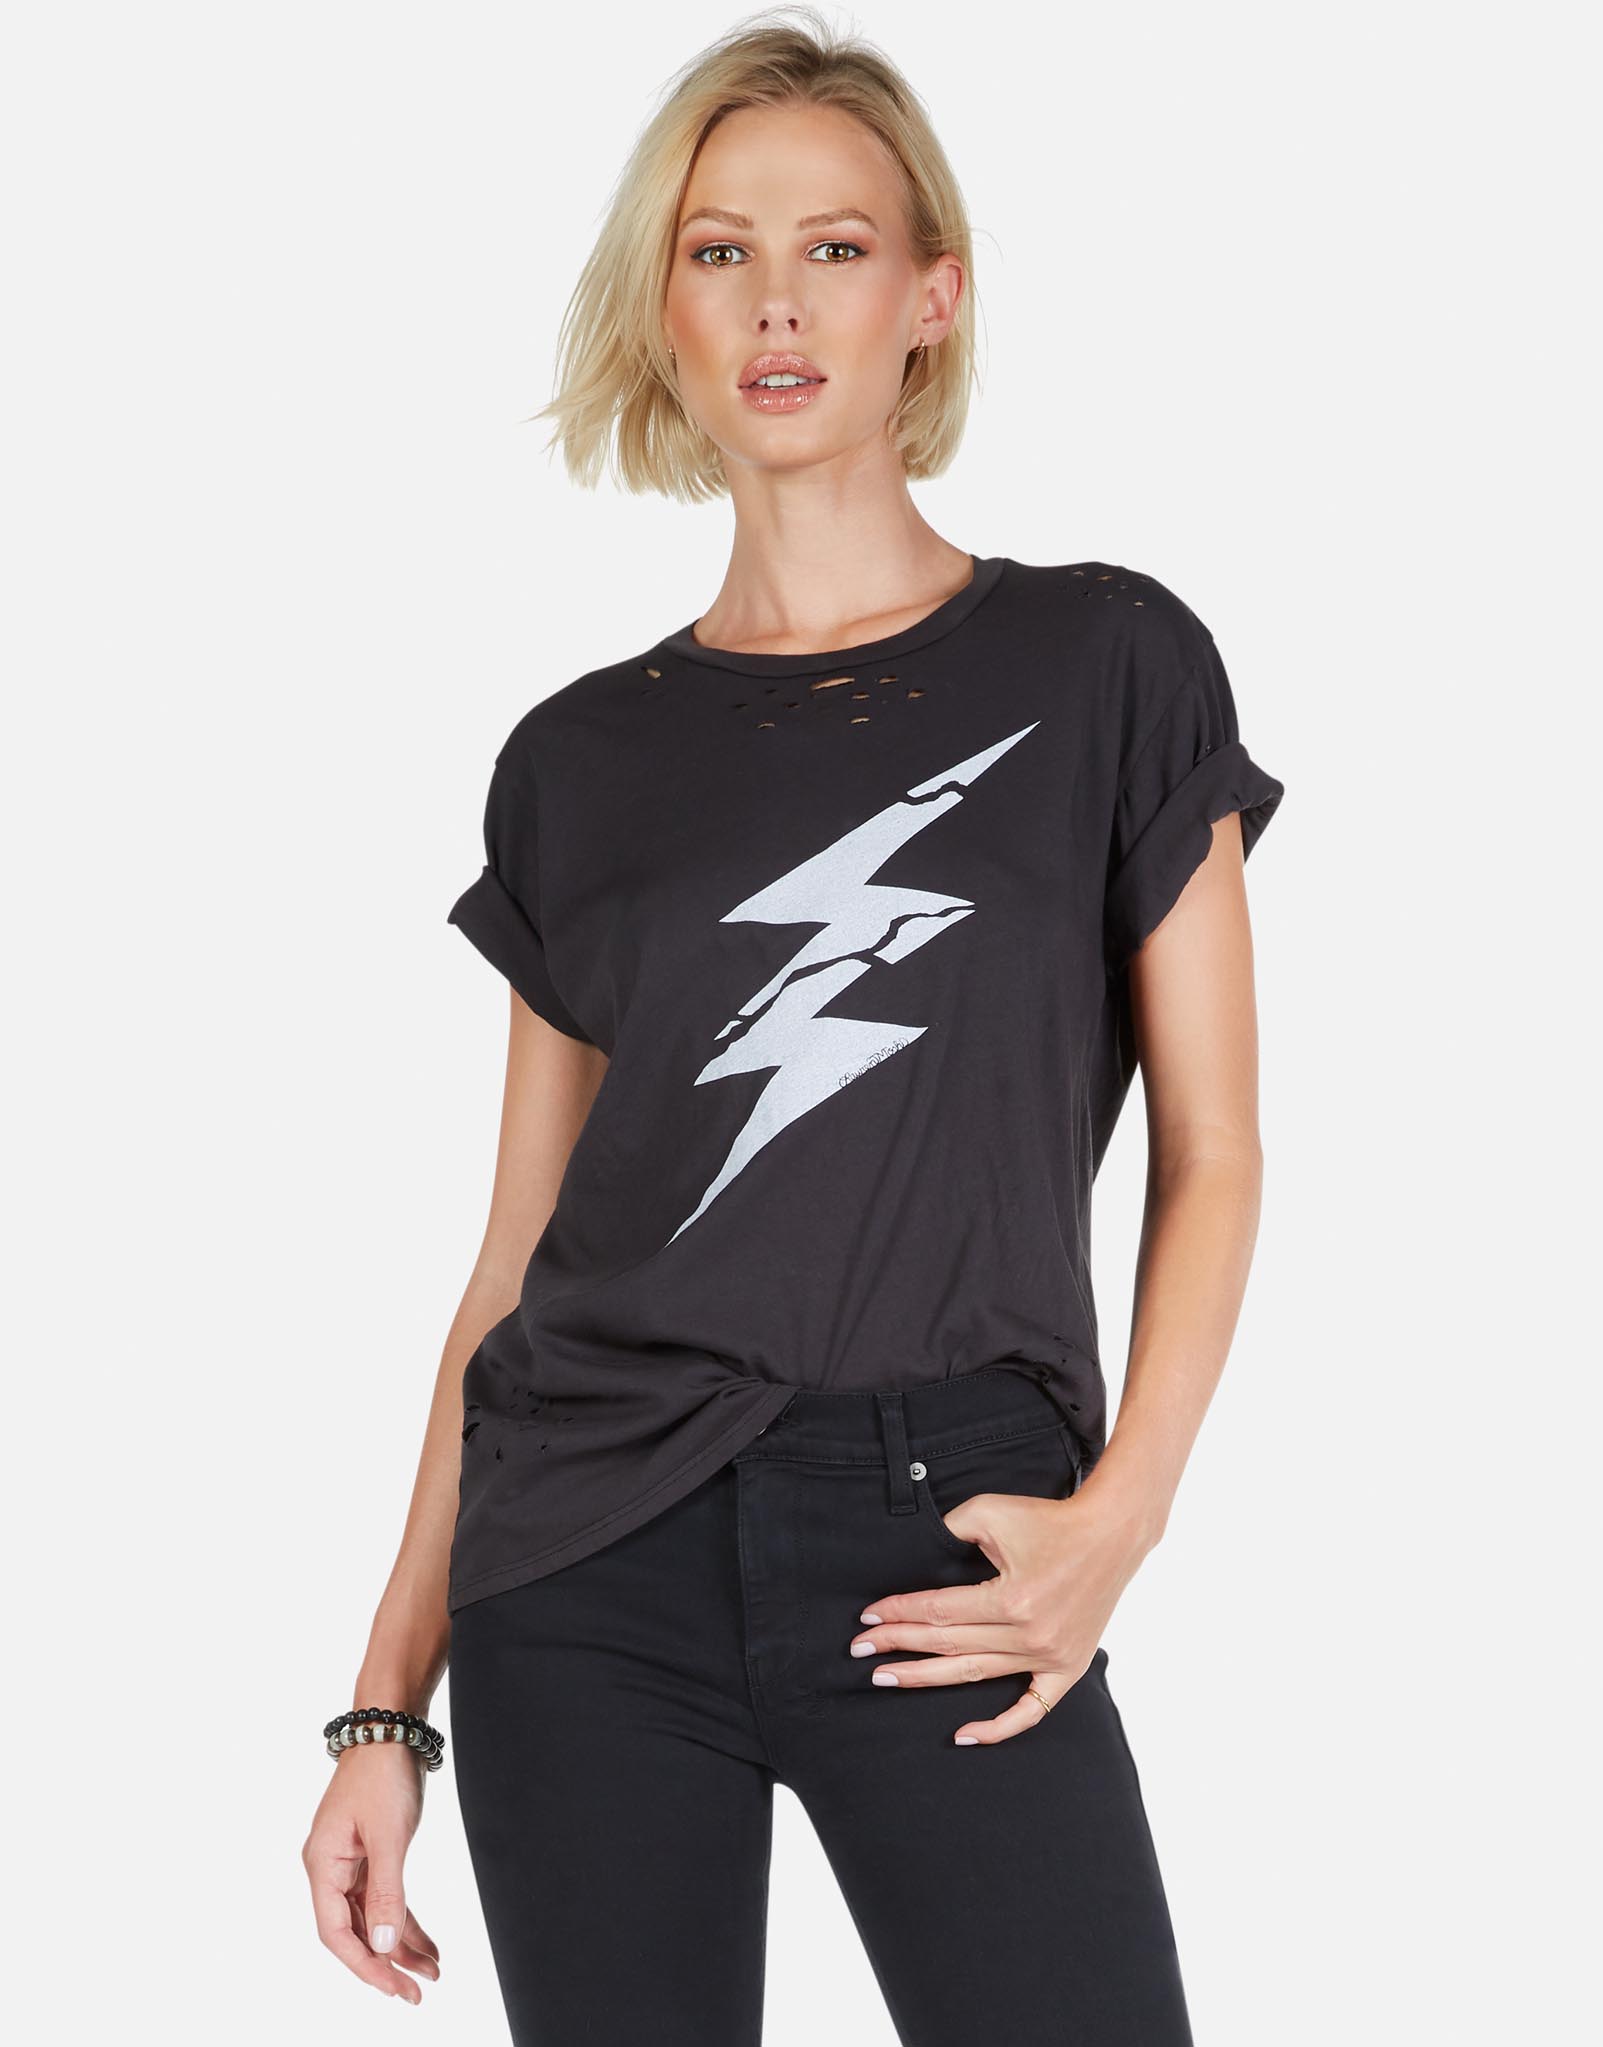 raw sleeves and raw hem crop tee with acdc bolt graphic